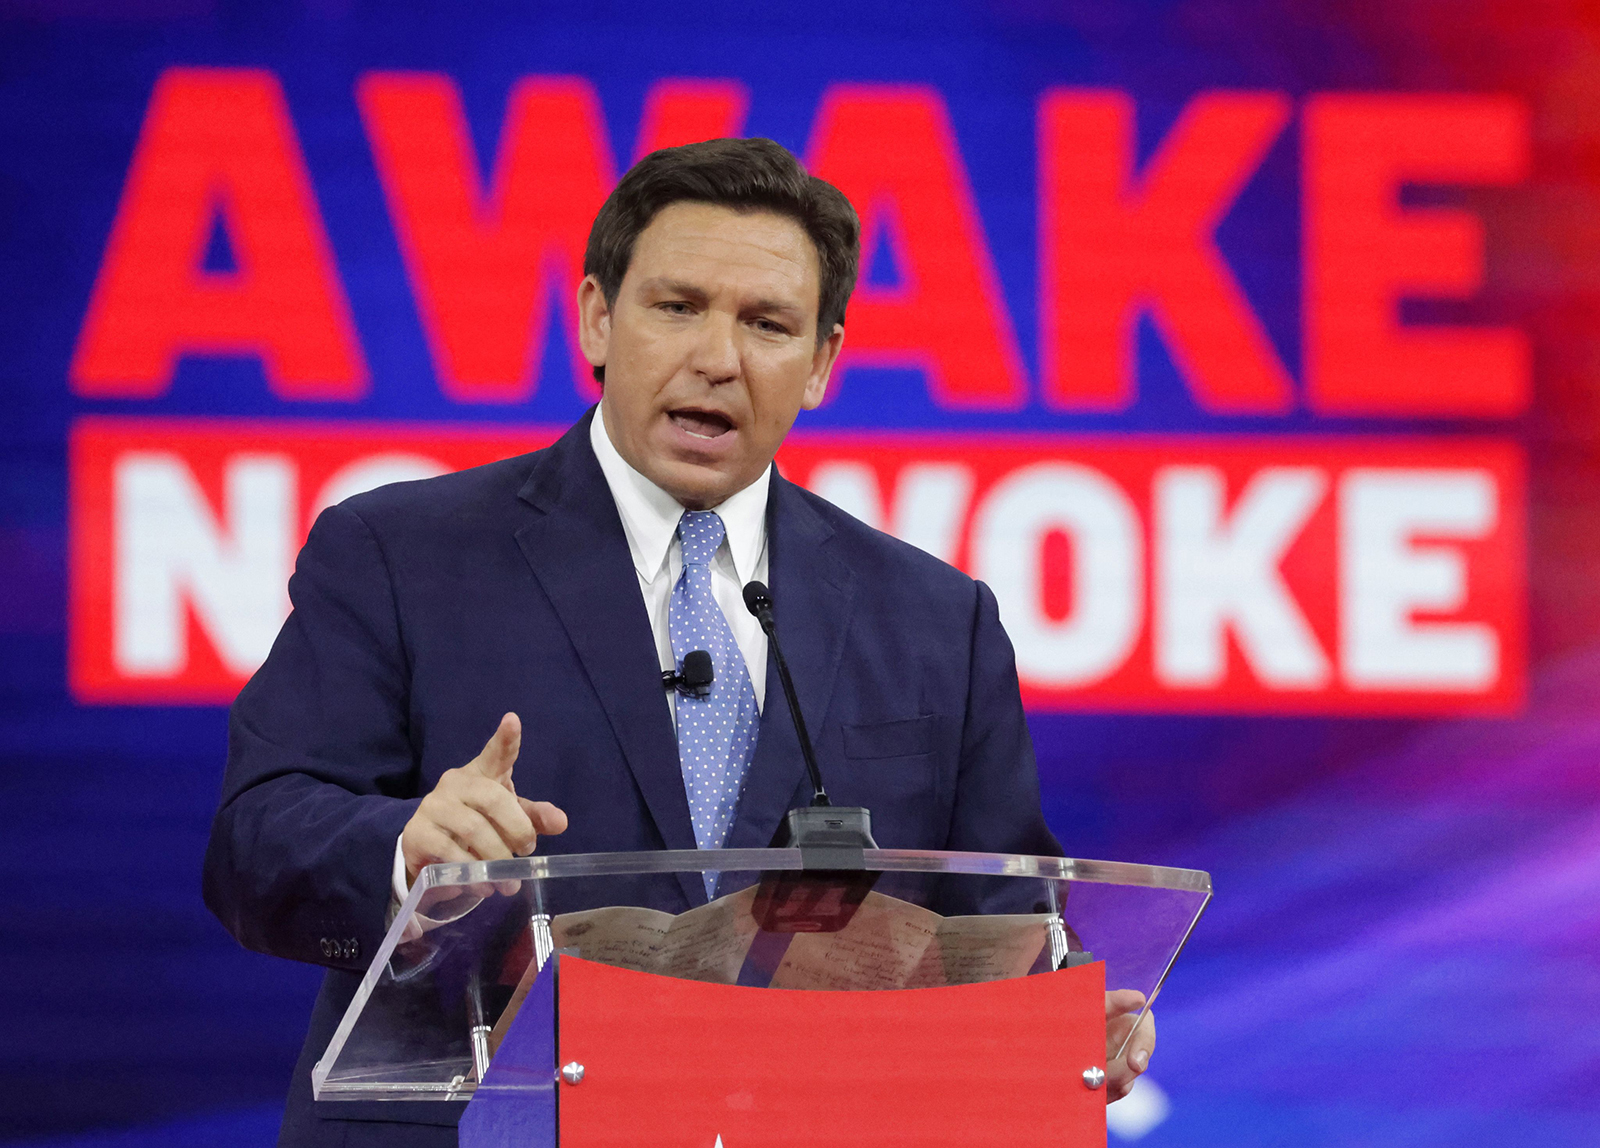 After Disney objects to "Don't Say Gay," Florida Gov. Ron DeSantis threatens the independence of the Magic Kingdom